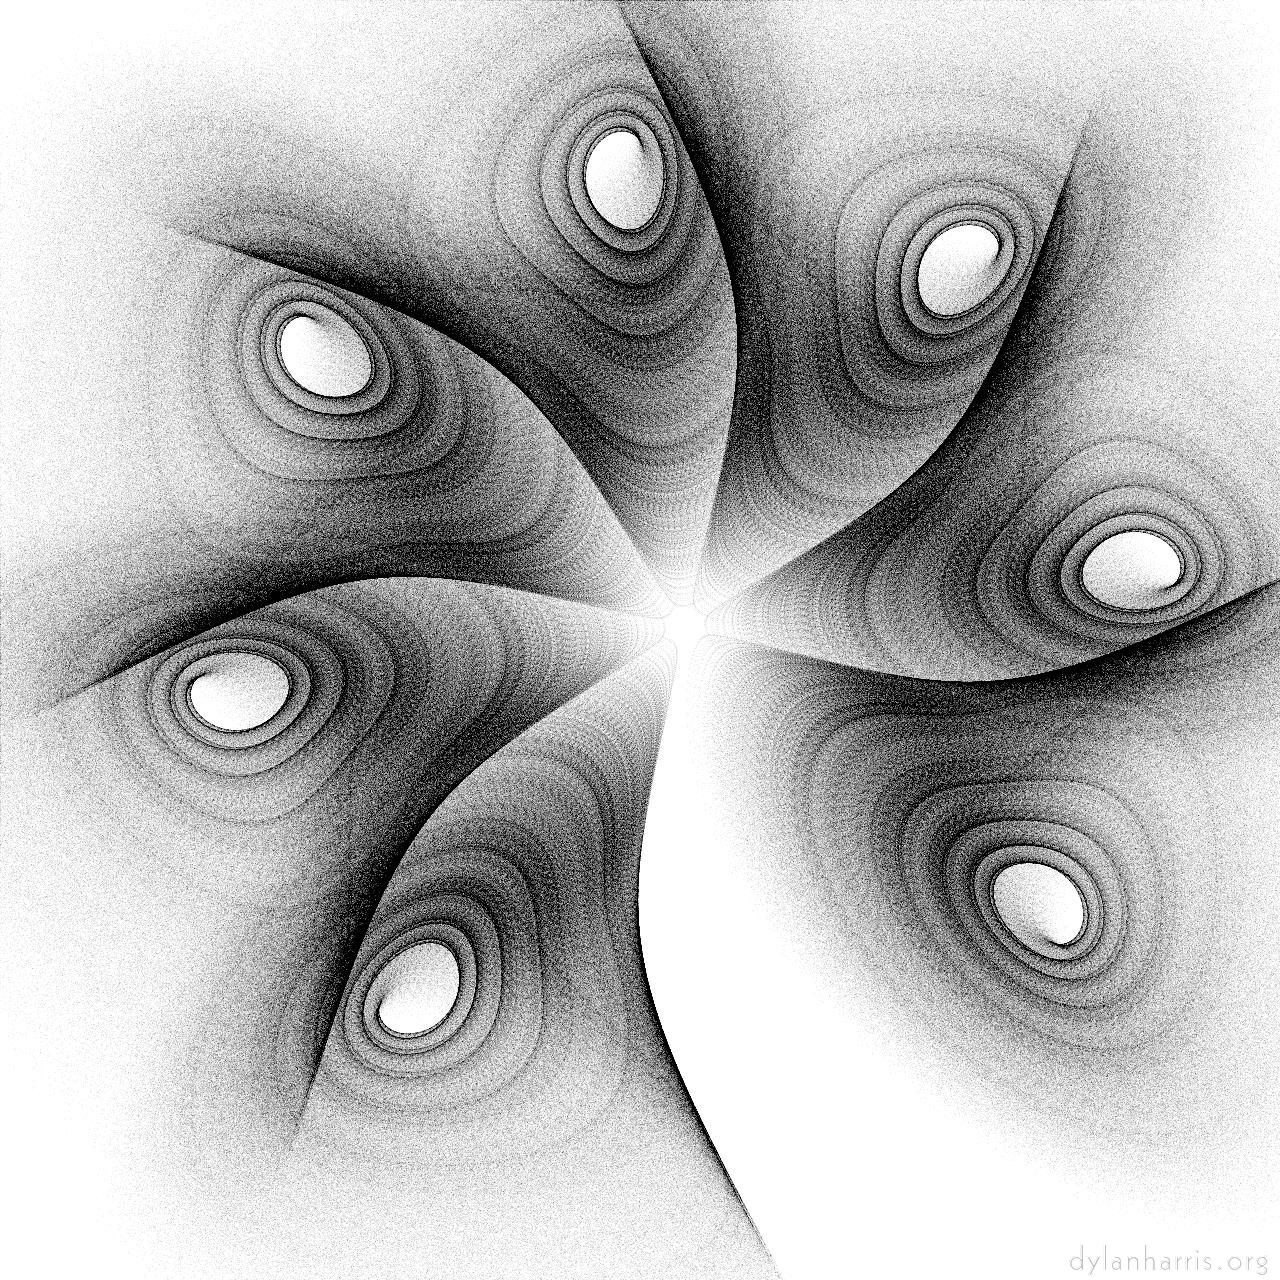 image: general examples (press action) :: spiral 4